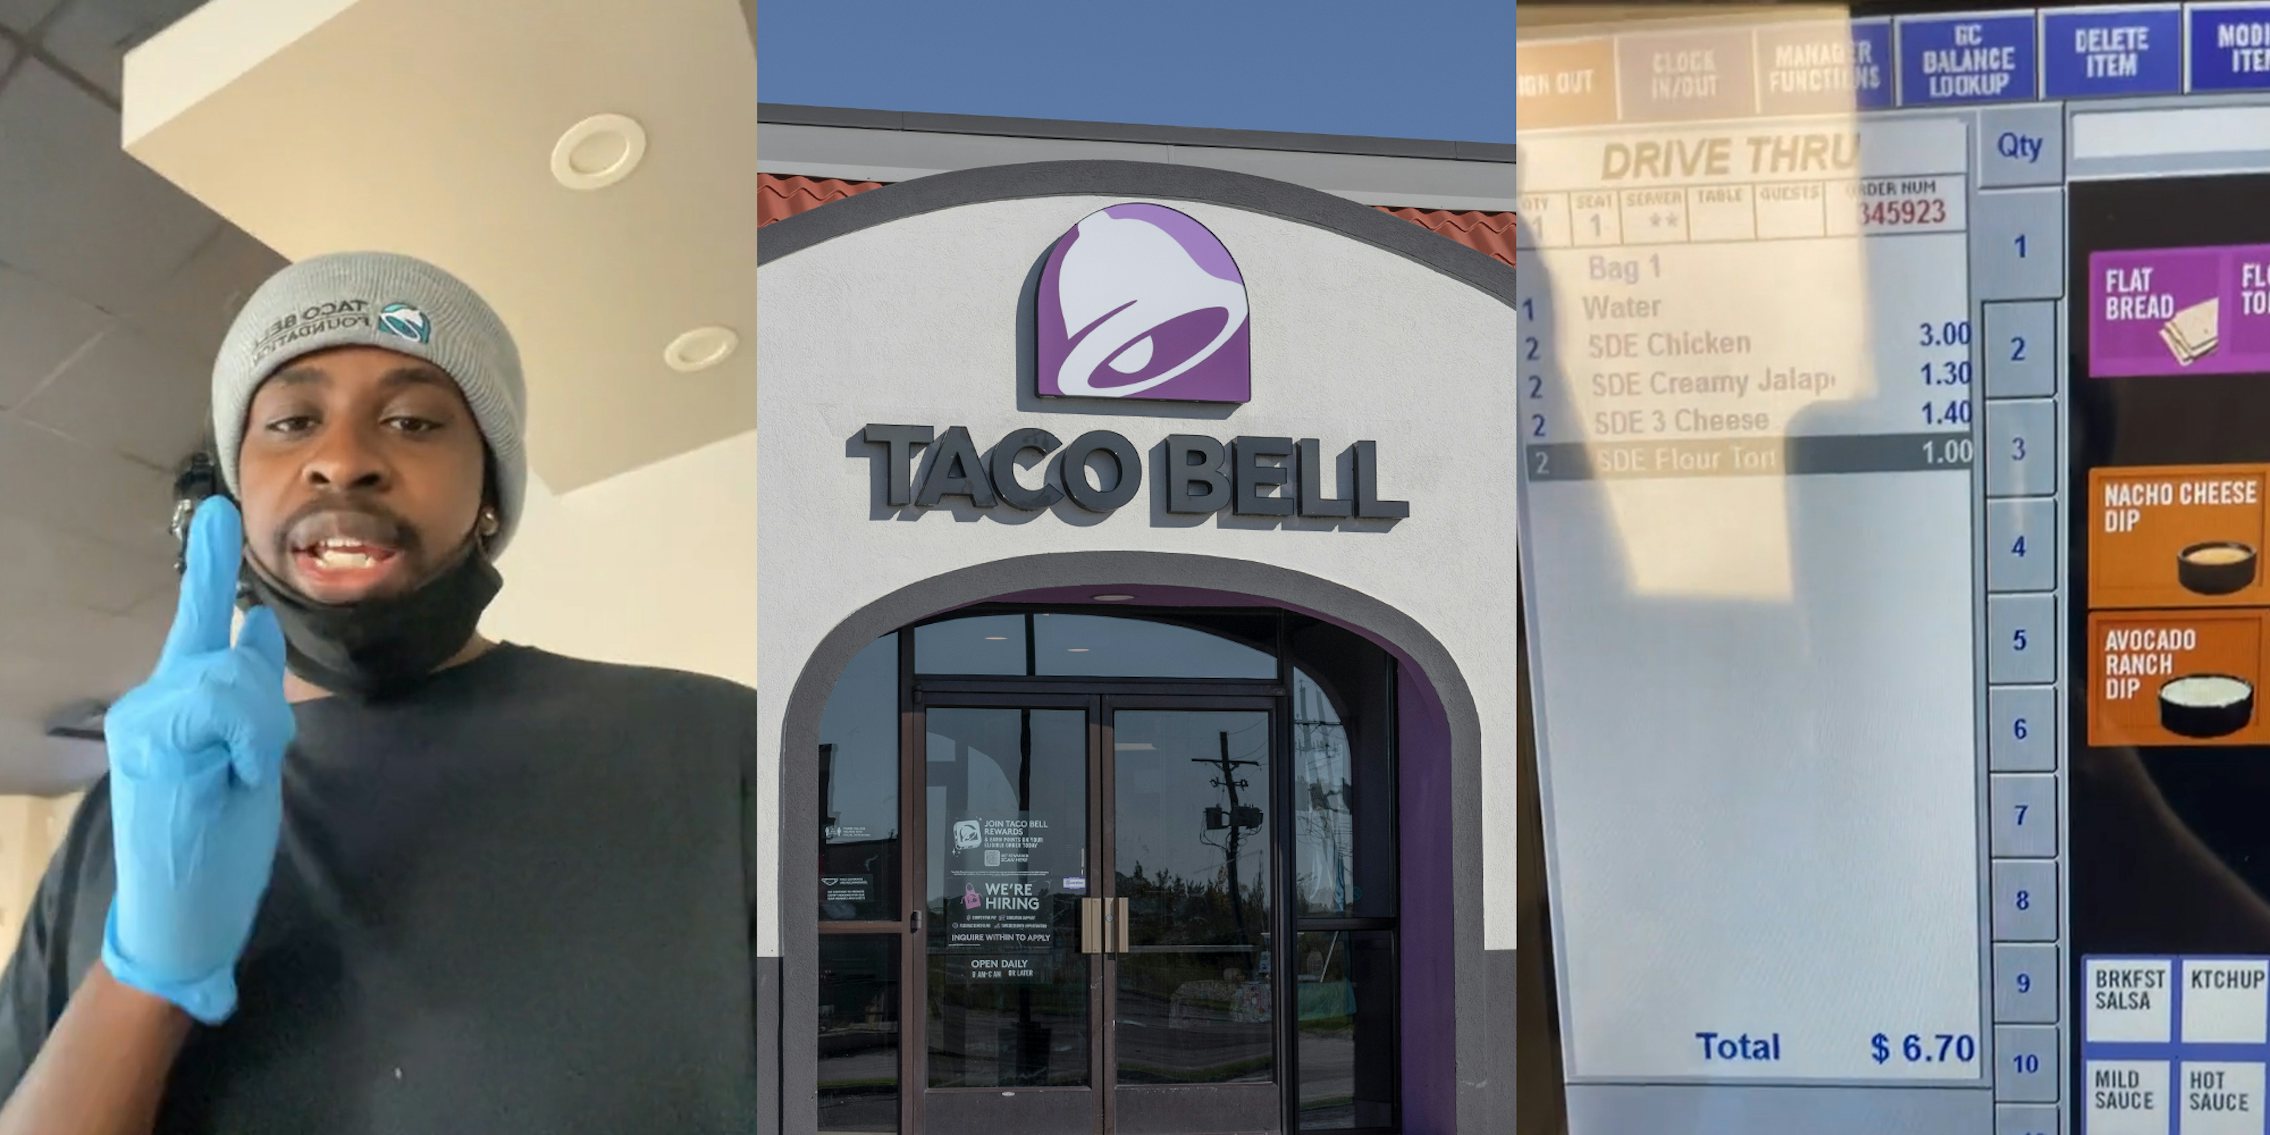 Taco Bell employee speaking (l) Taco Bell entrance with sign (c) Taco Bell order screen with water chicken creamy jalapeno 3 cheese flour tortilla' with total at $6.70 (r)